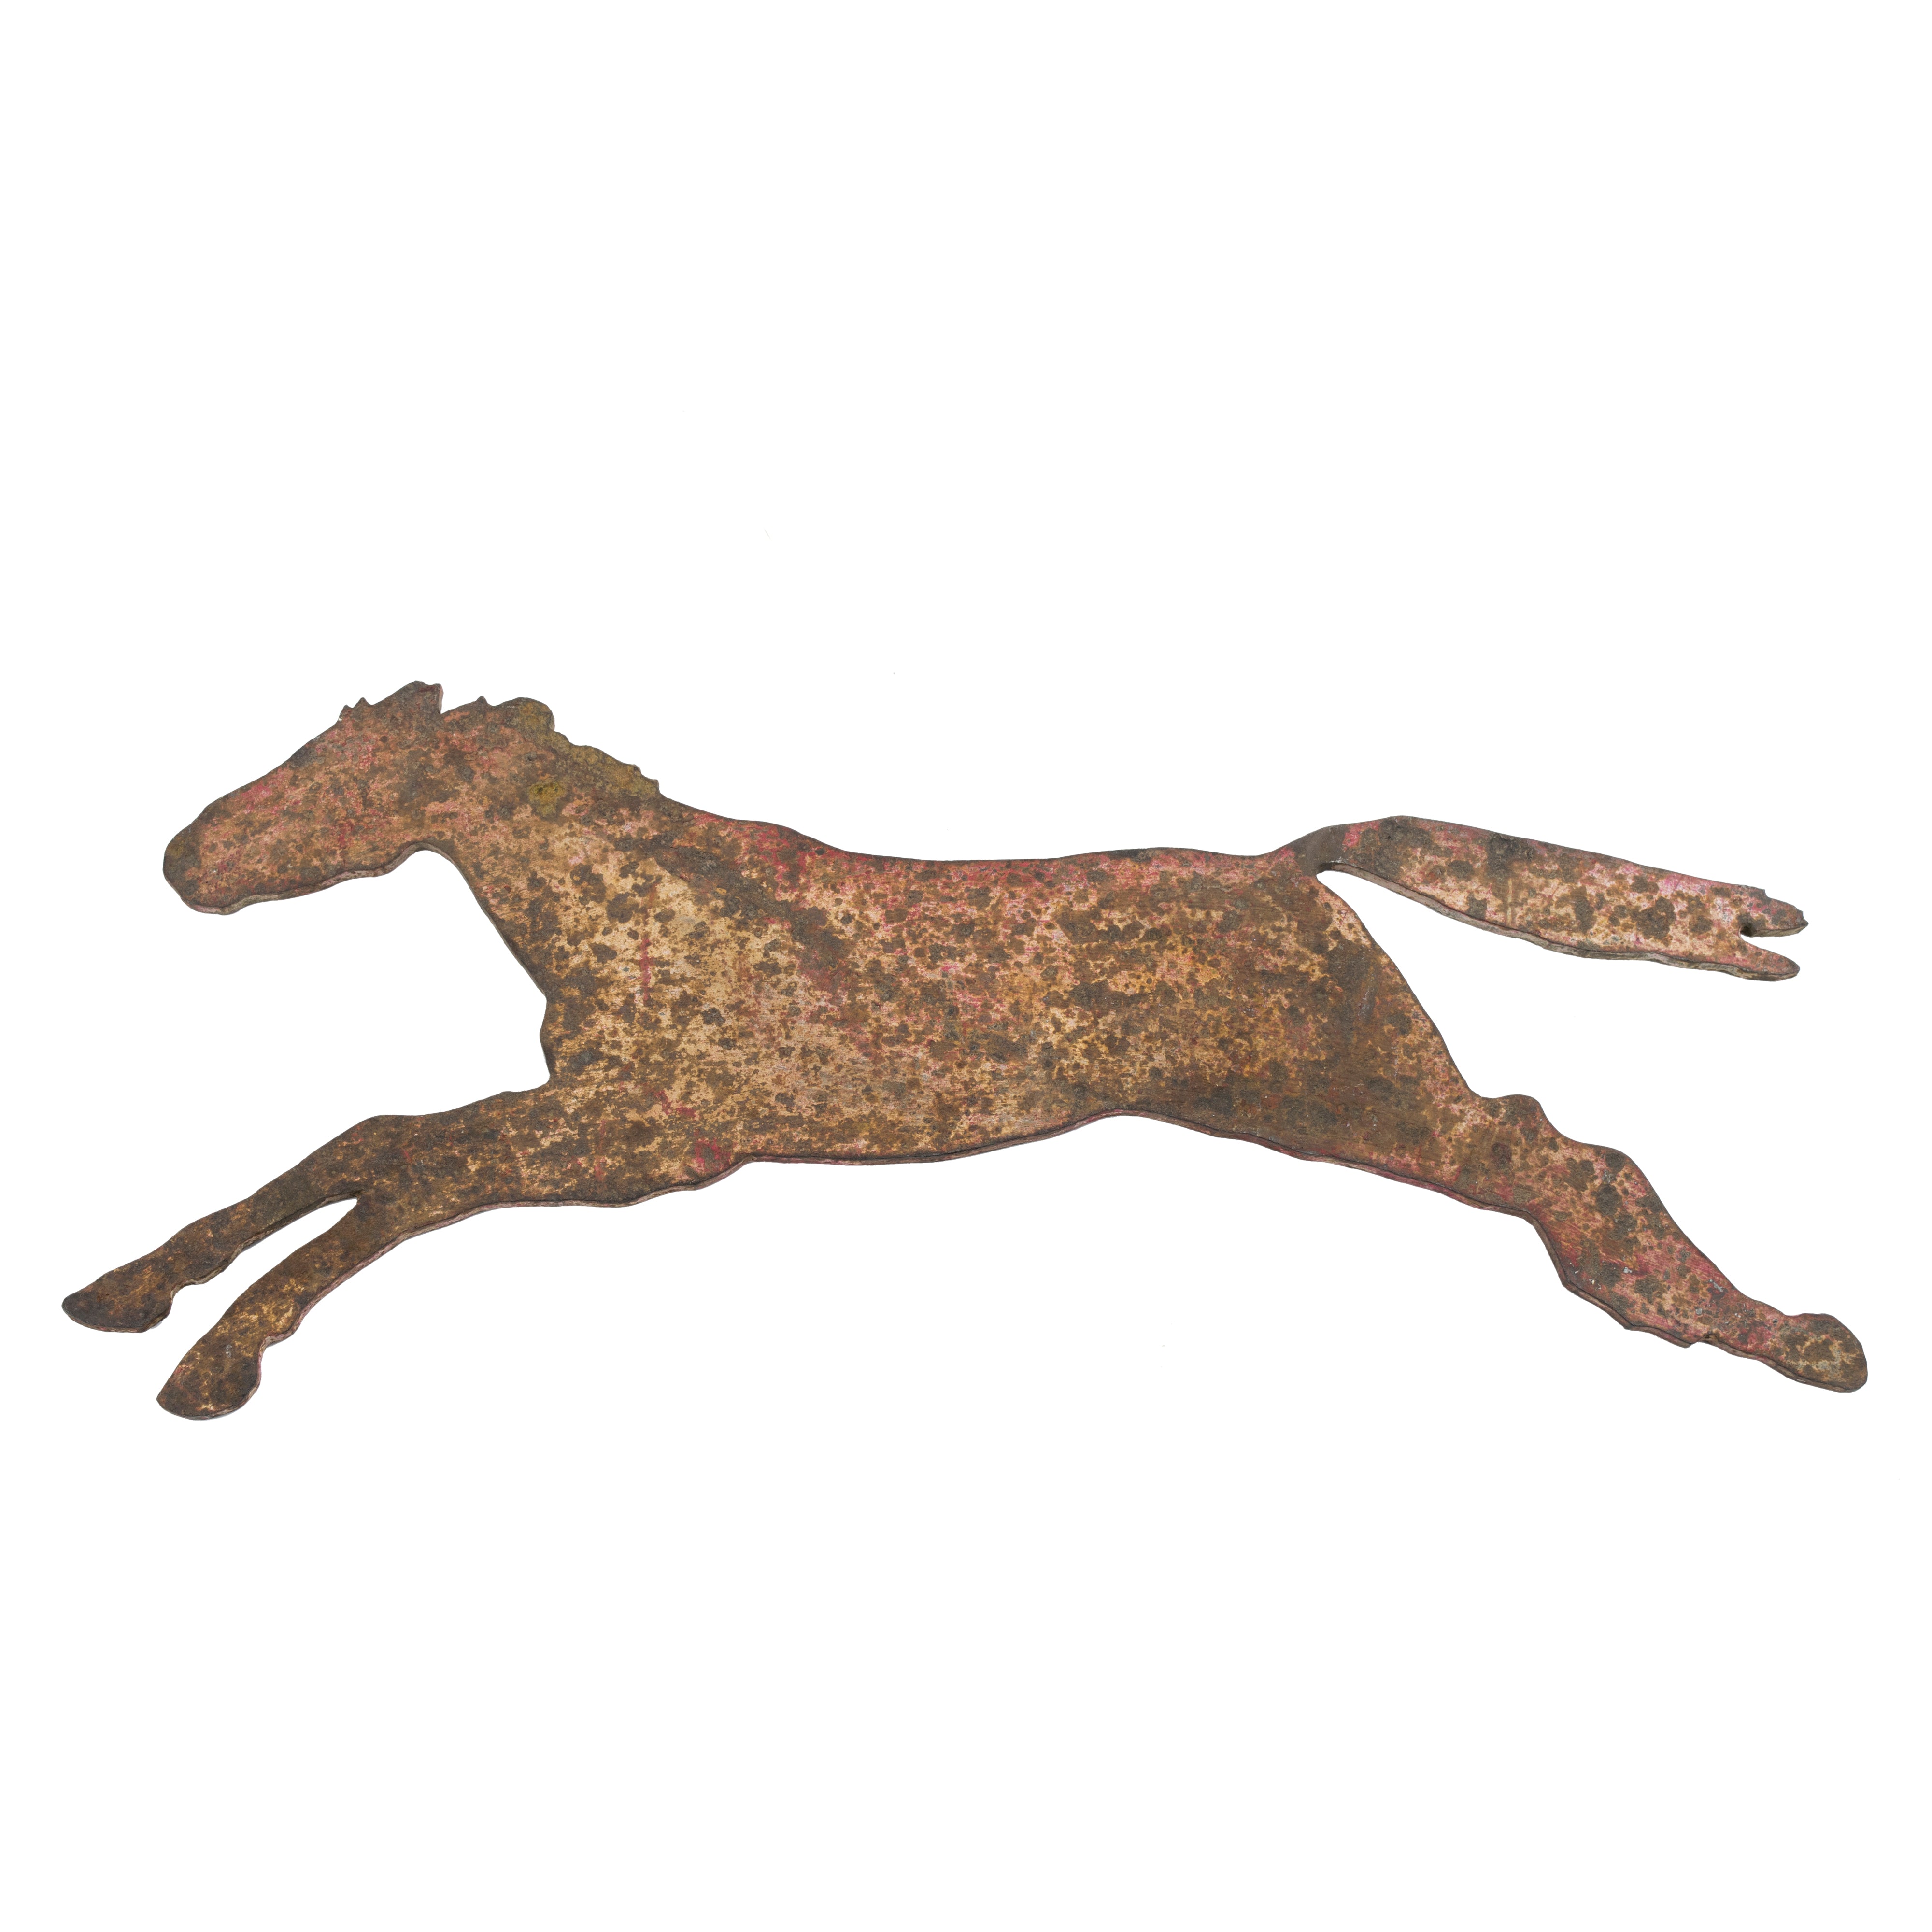 Collection of Four Horse Cutouts